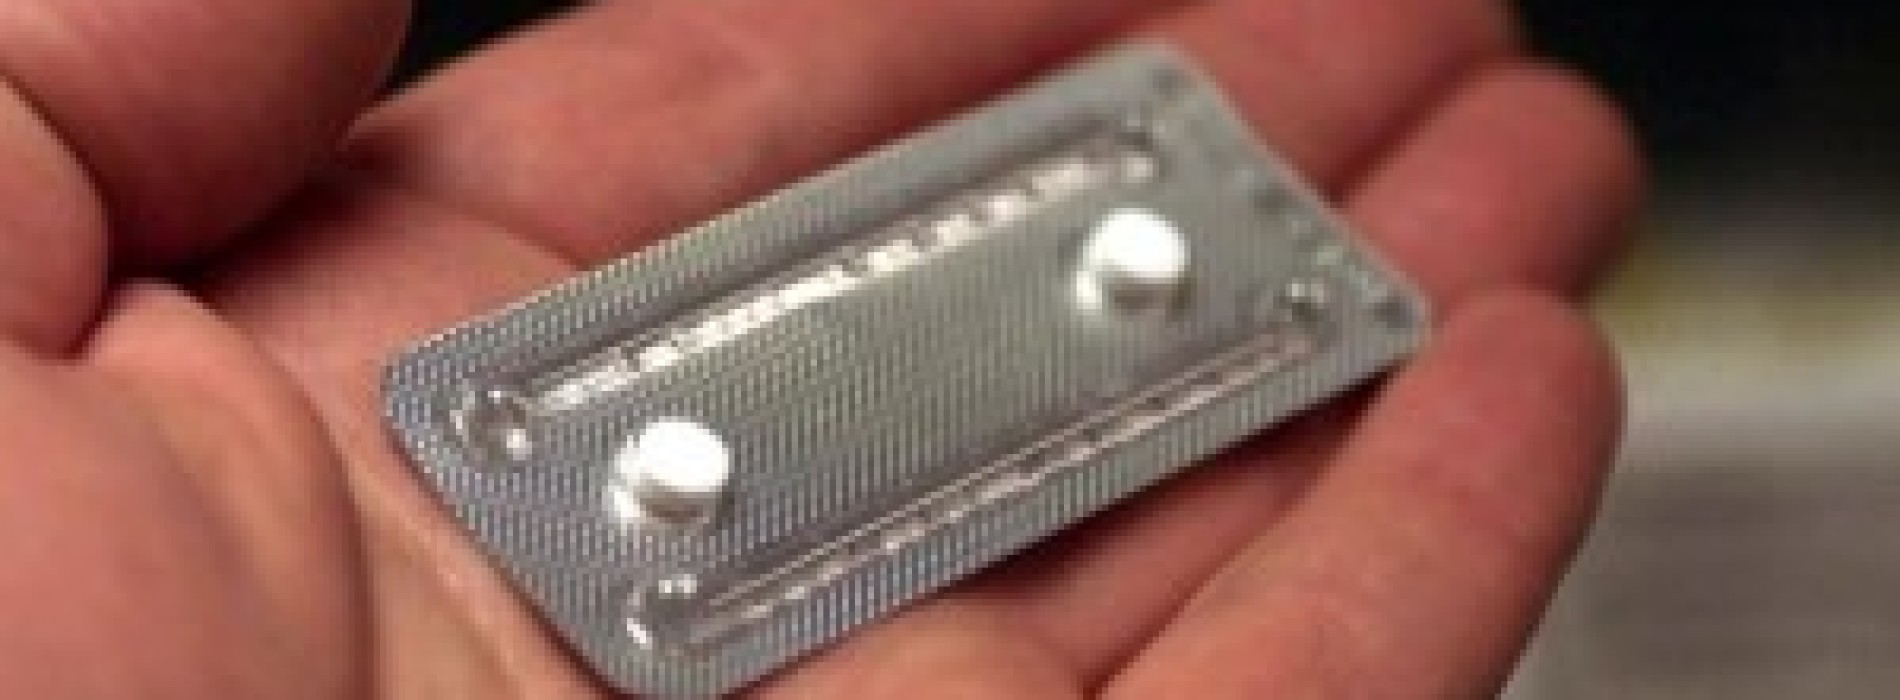 Facts you should know about Emergency Contraceptives